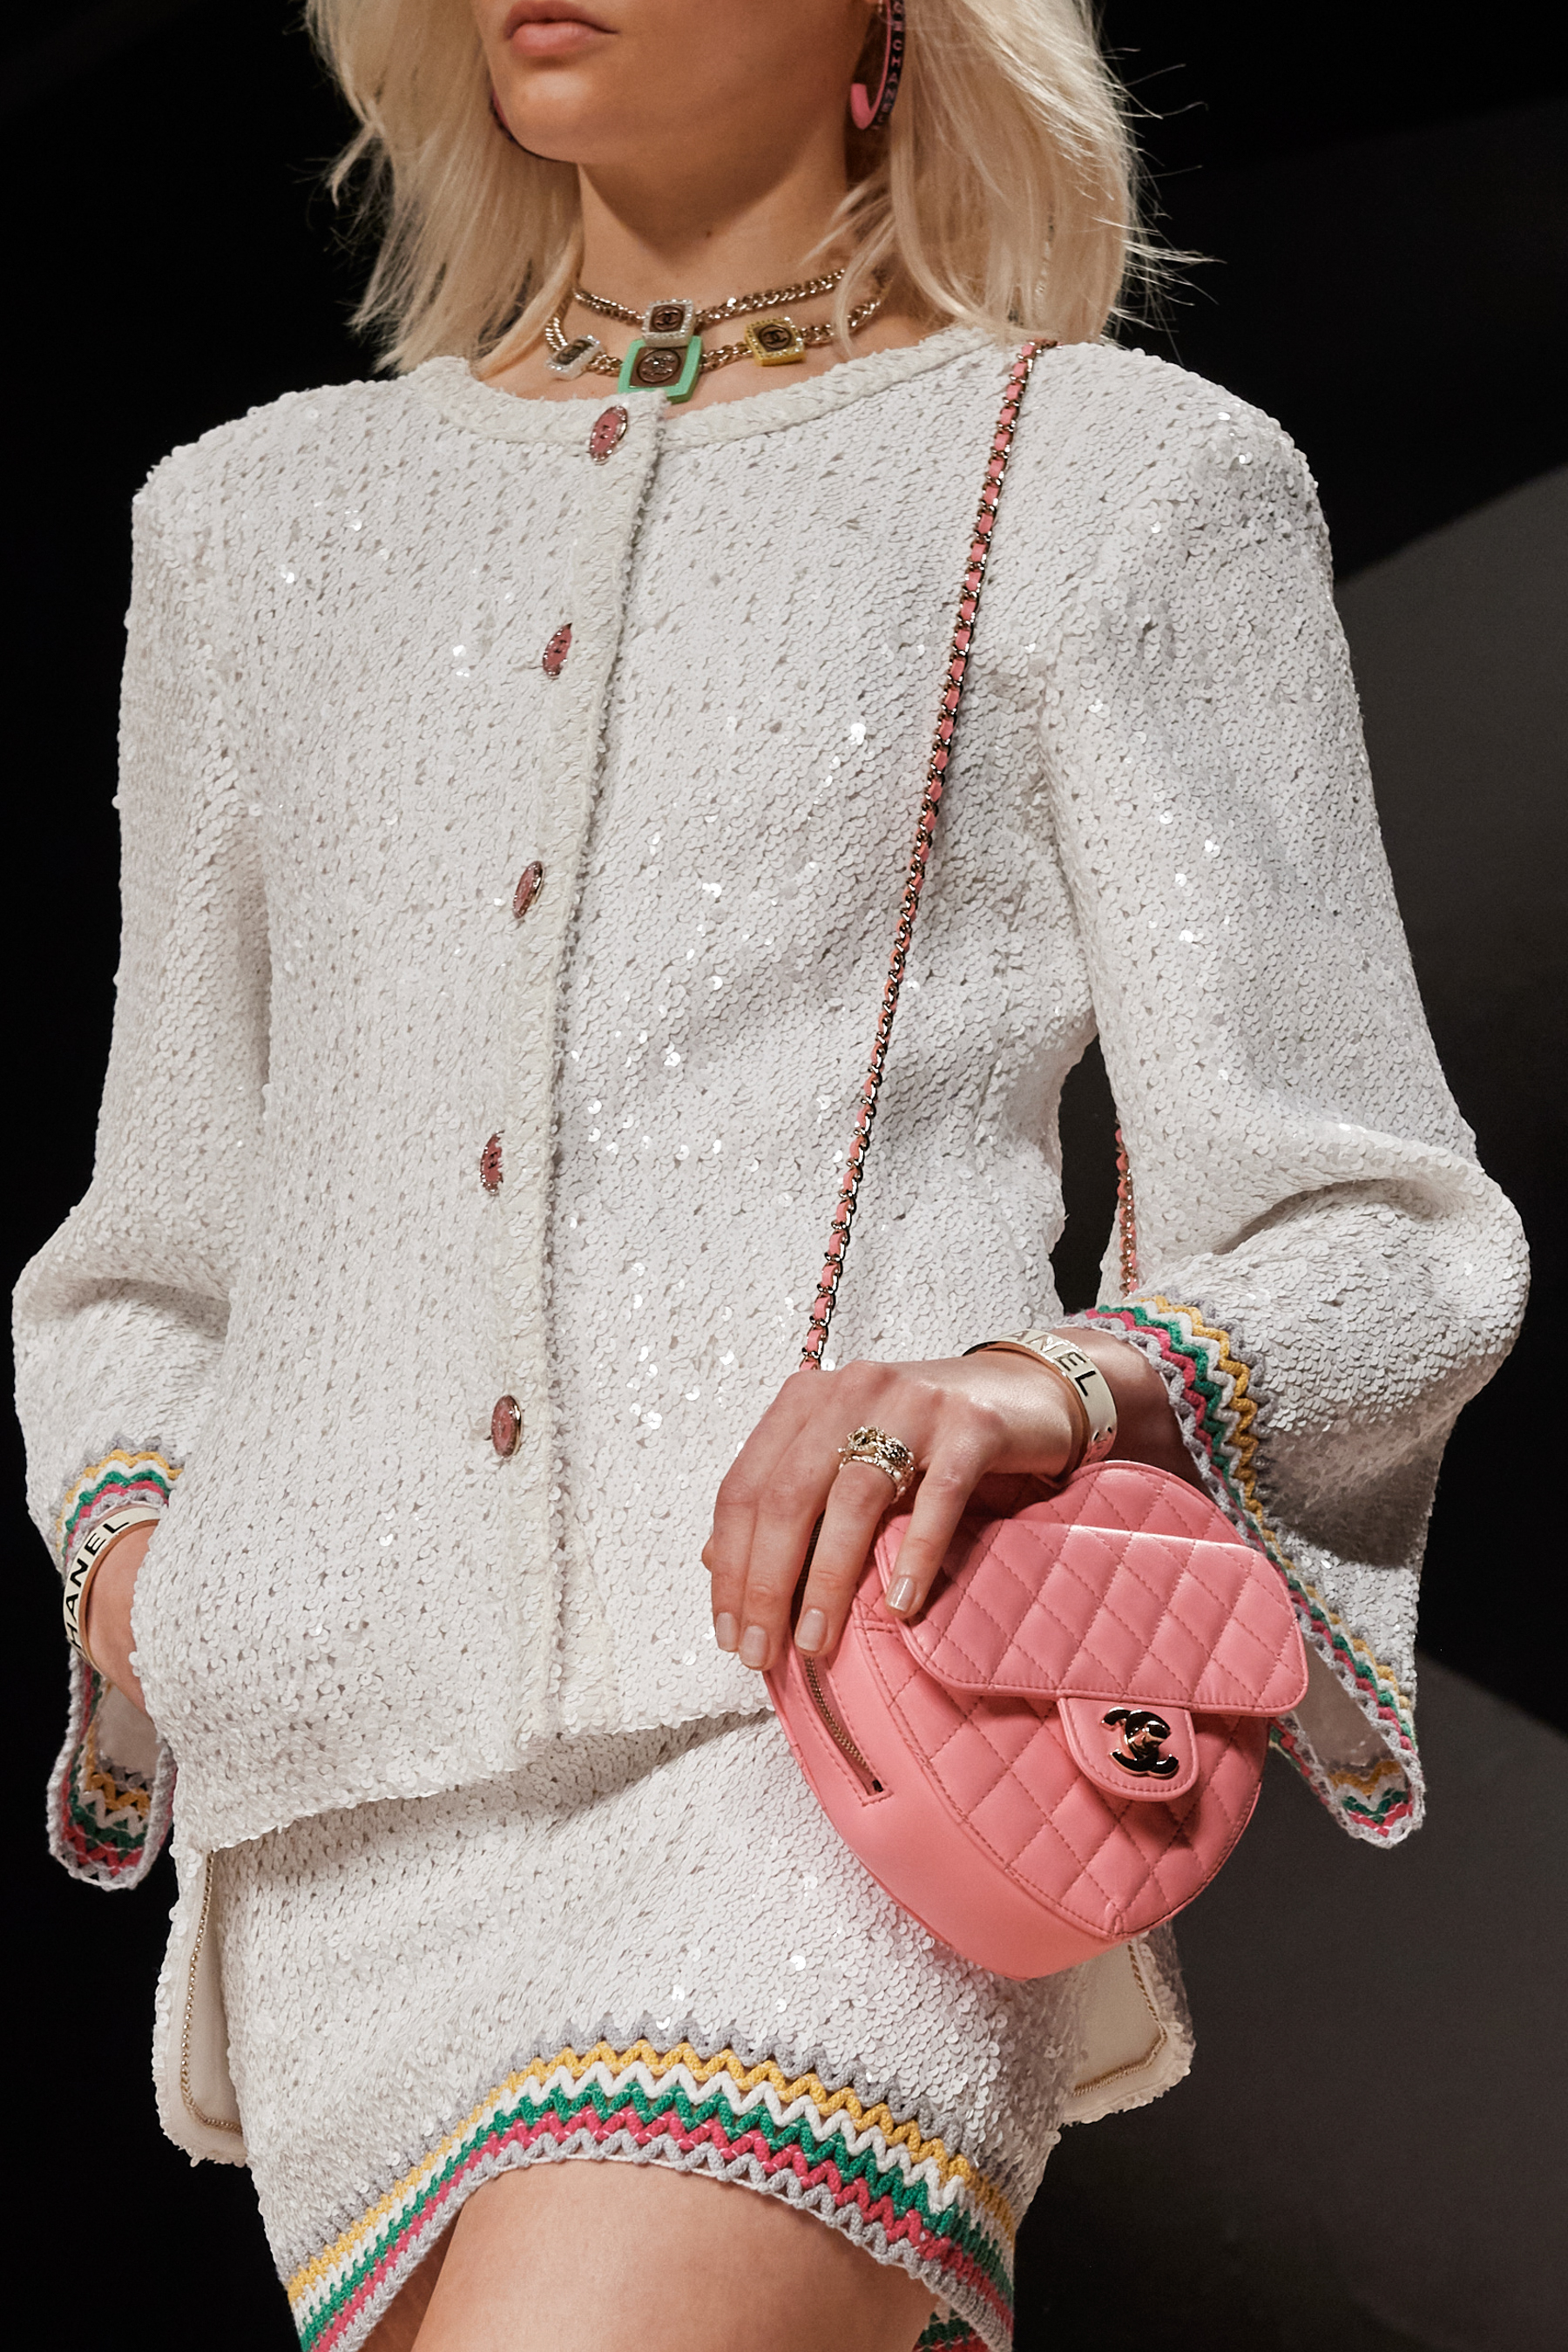 Chanel Spring 2022 Details Fashion Show